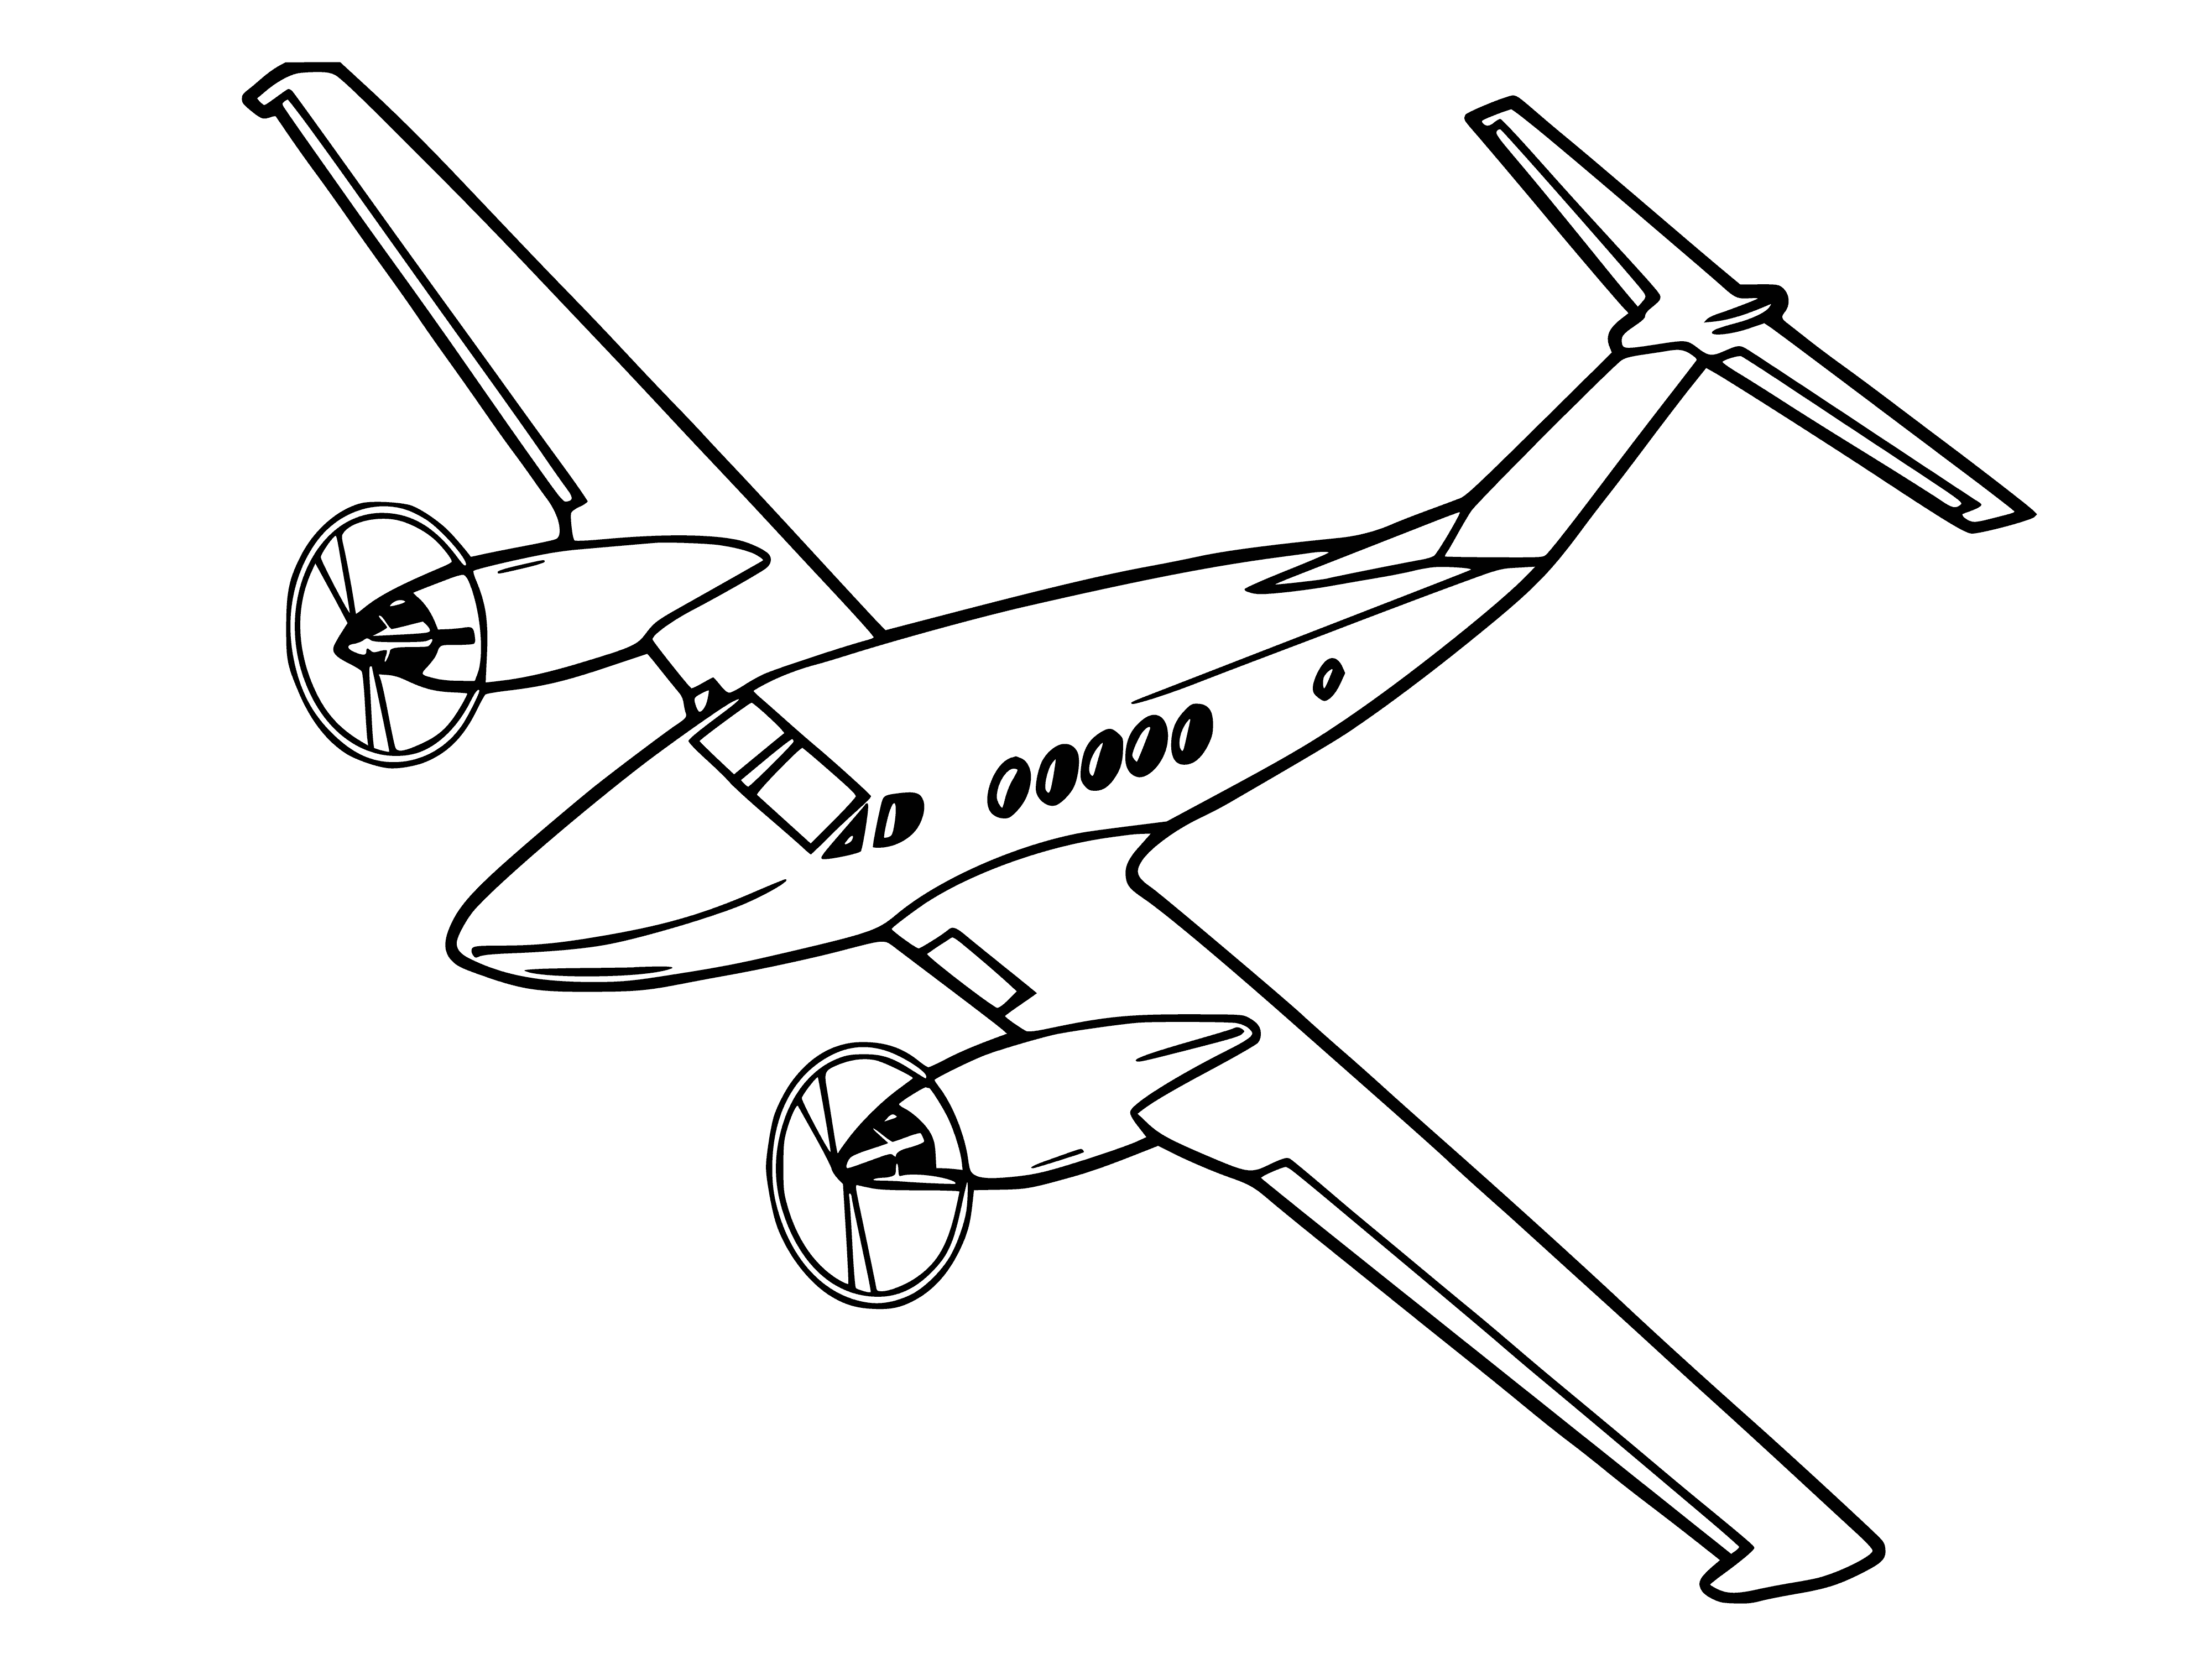 coloring page: An airplane is a long, slender flying machine with pointed nose, tall tail, and wings; powered by silver engines and present on runways ready for takeoff. #aviation